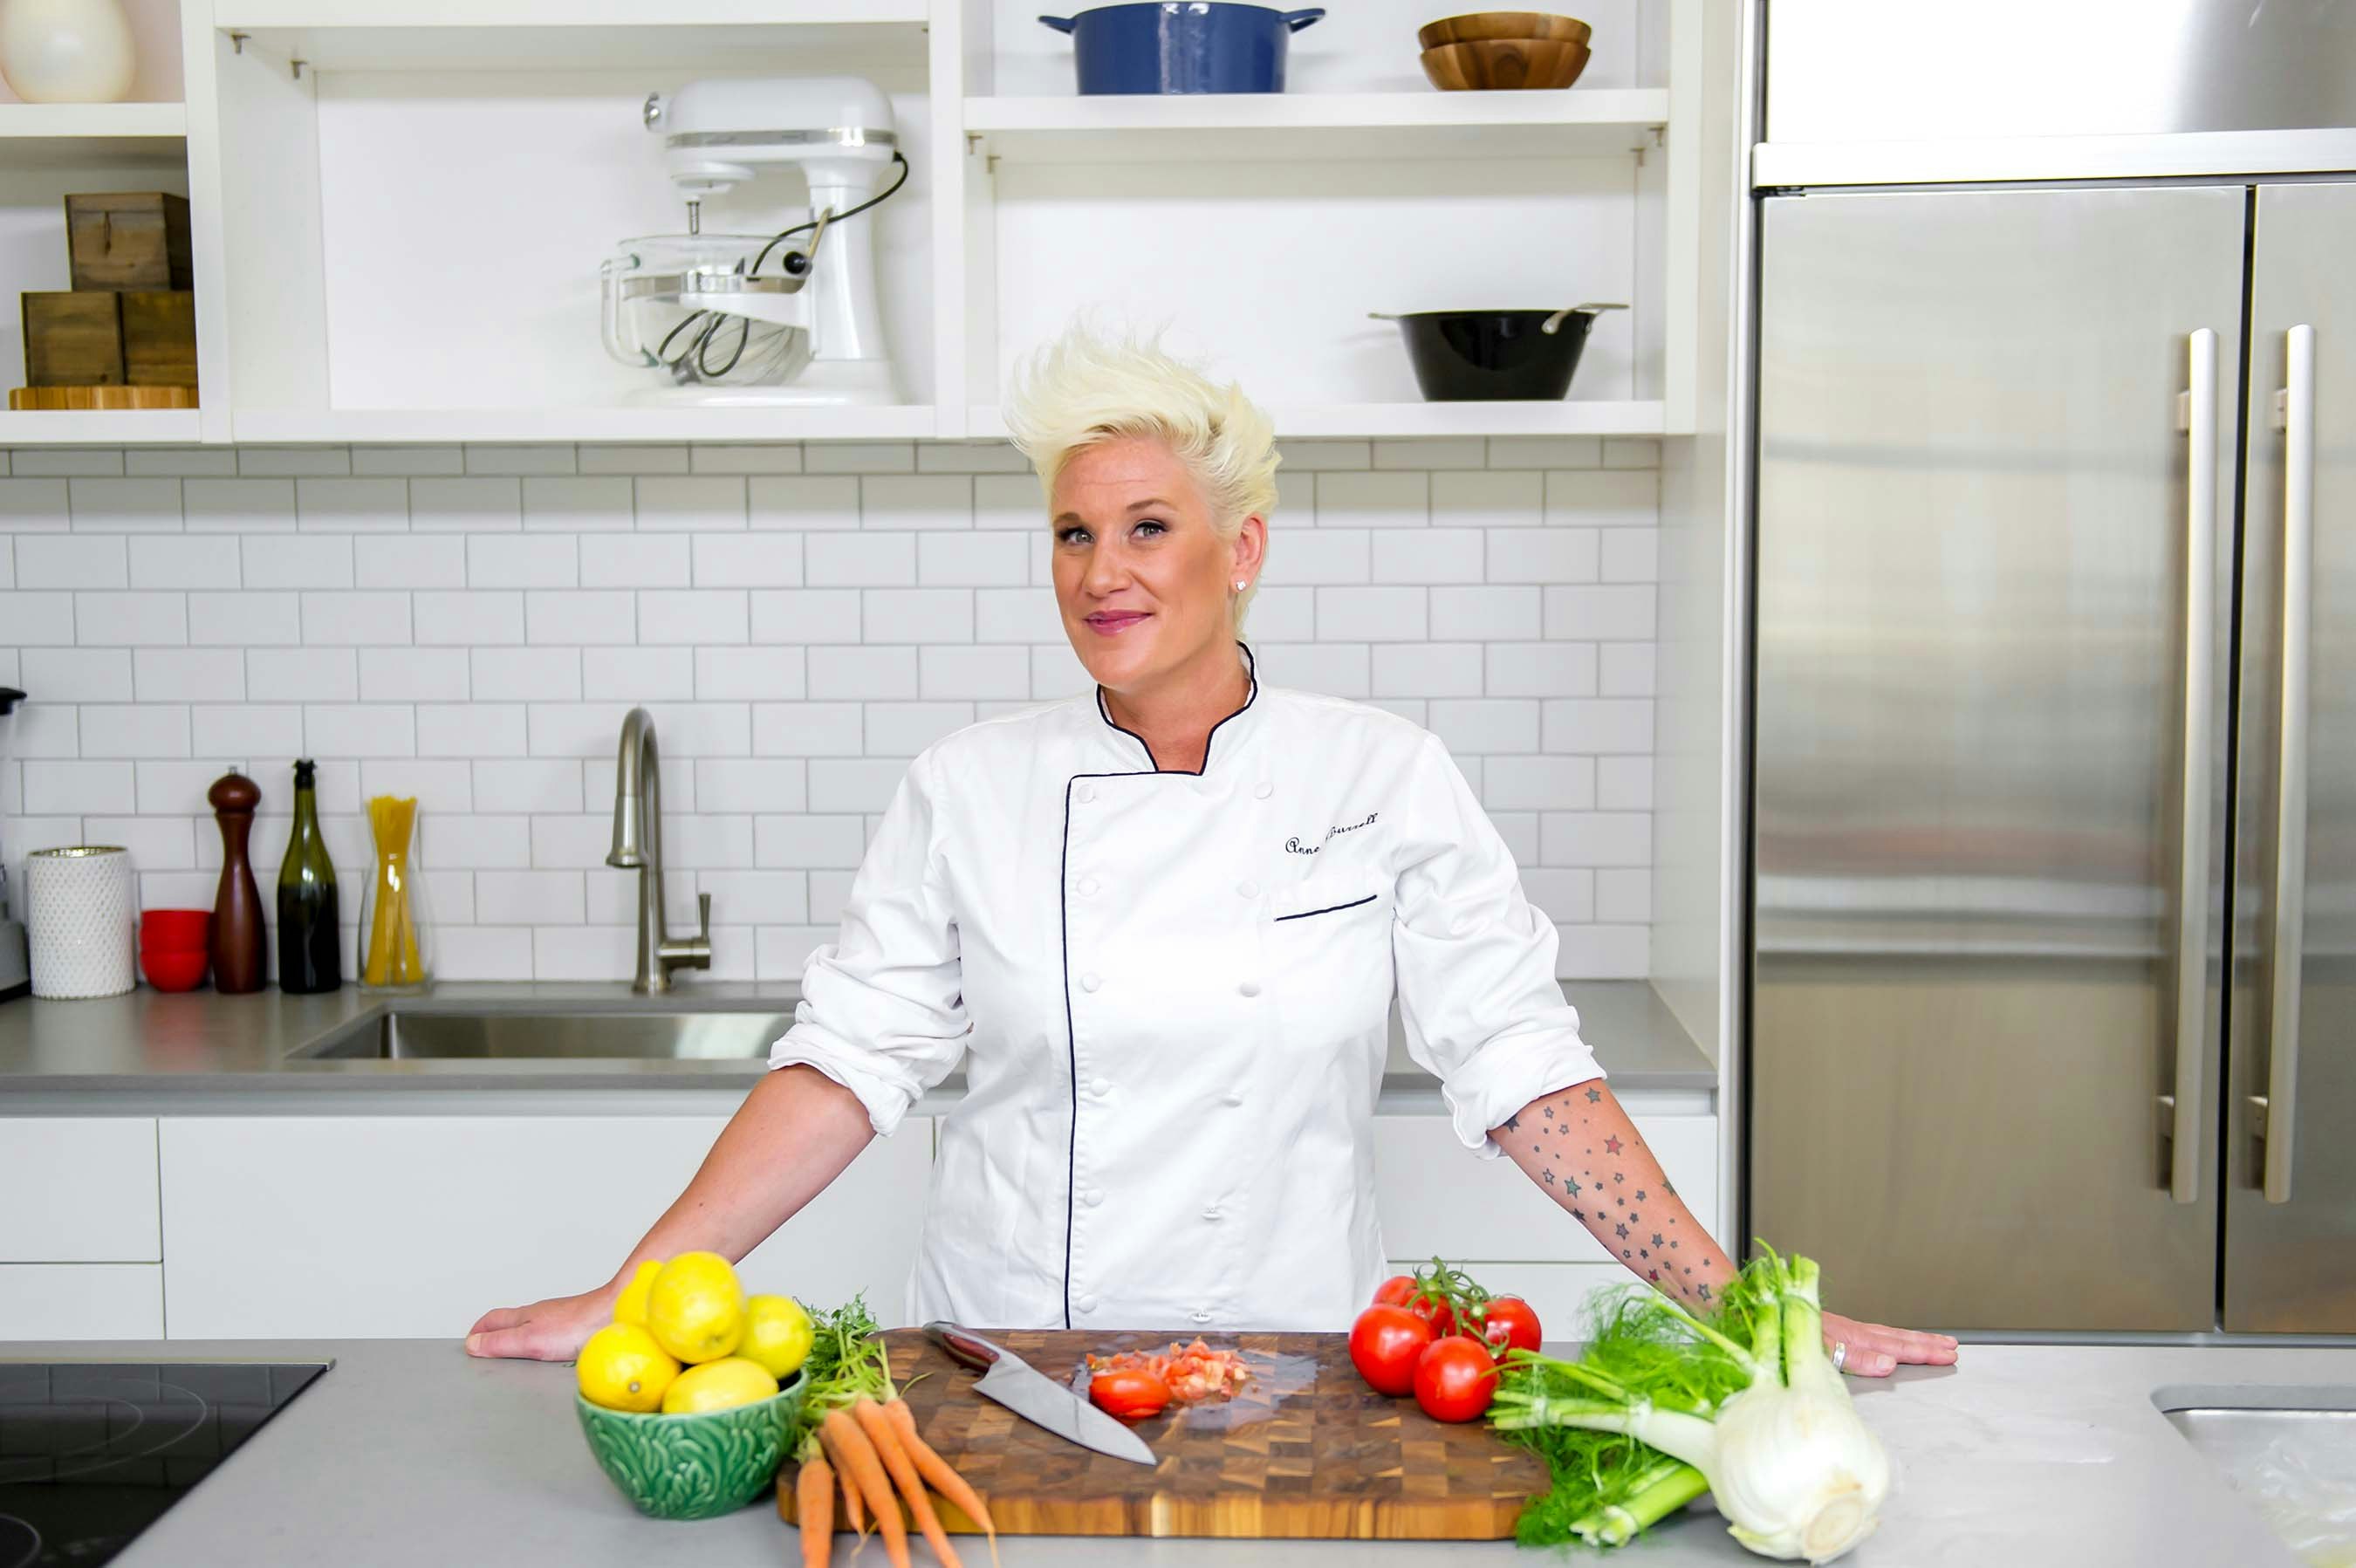 Chef Anne Burrell has overseen the menu at the Cheetos restaurant. Image: The Spotted Cheetah 